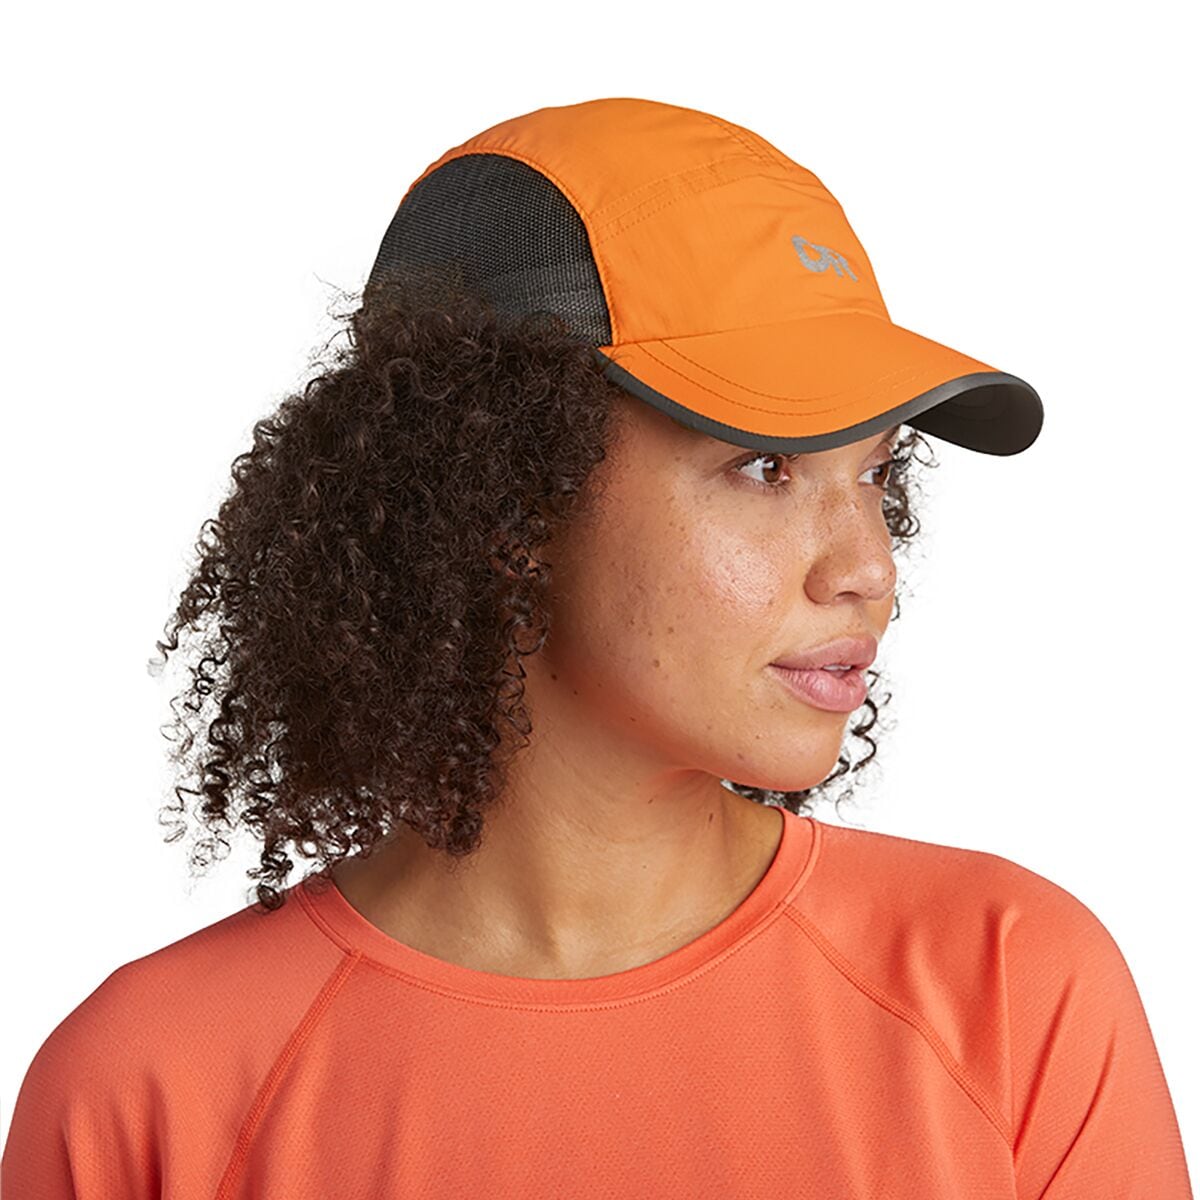 discount 50% WOMEN FASHION Accessories Hat and cap Orange Orange Single ONLY hat and cap 